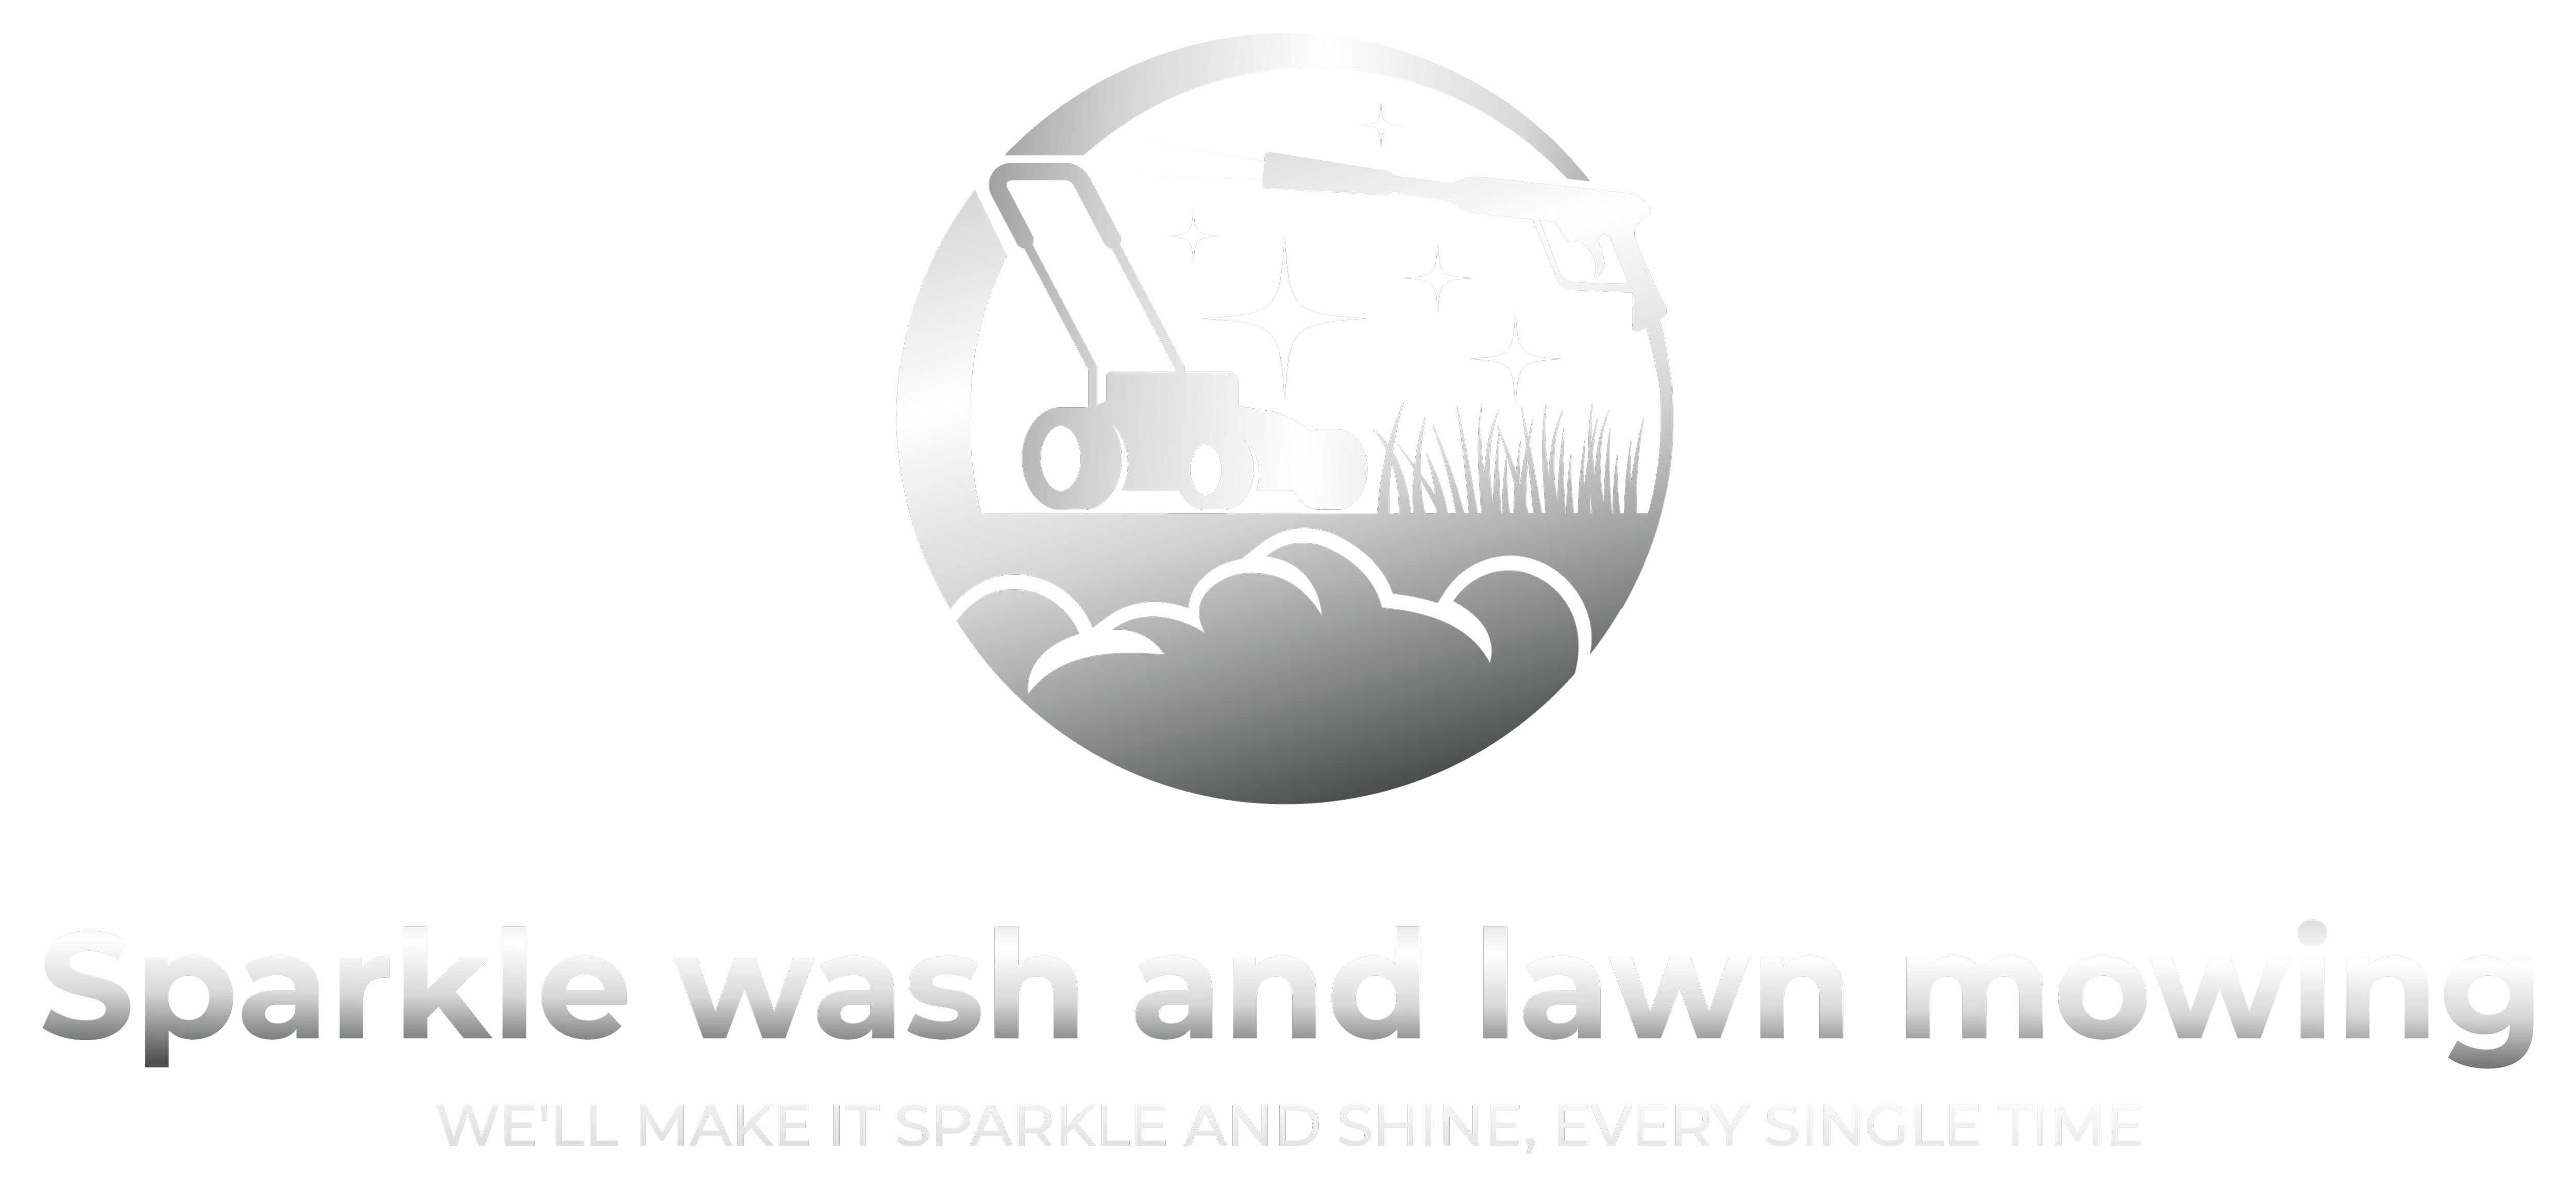 Sparkle Wash and Lawn Mowing Site logo